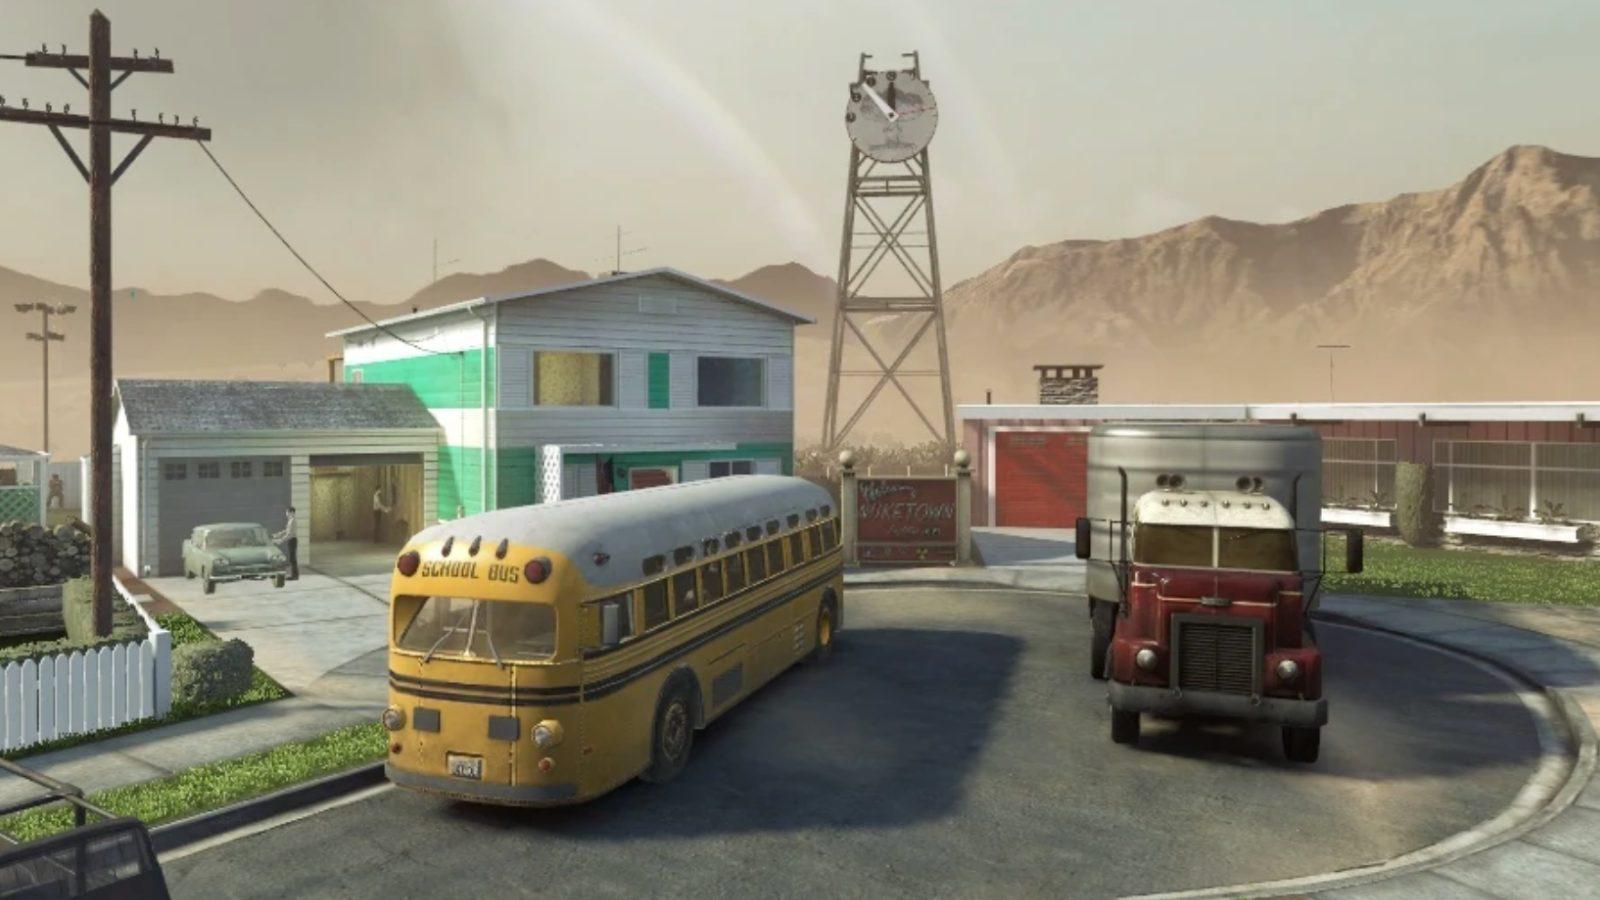 Call of Duty Black Ops classic map Nuketown.